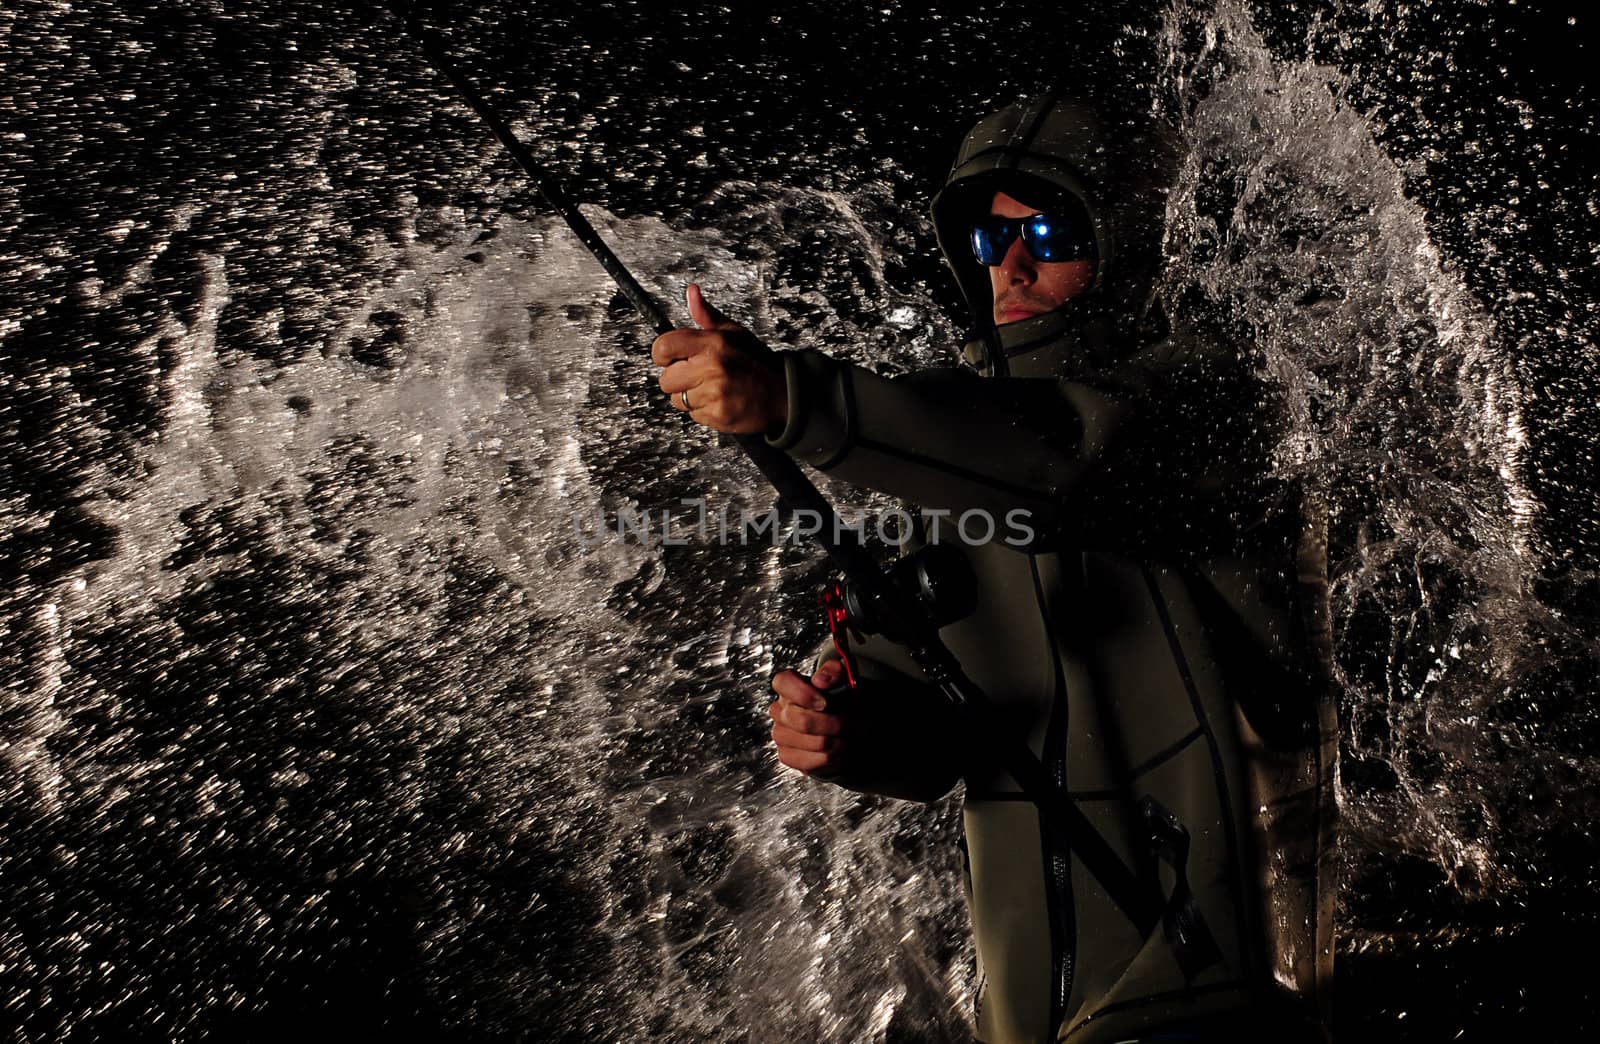 main in rain wearing jacket and holding fishing rod